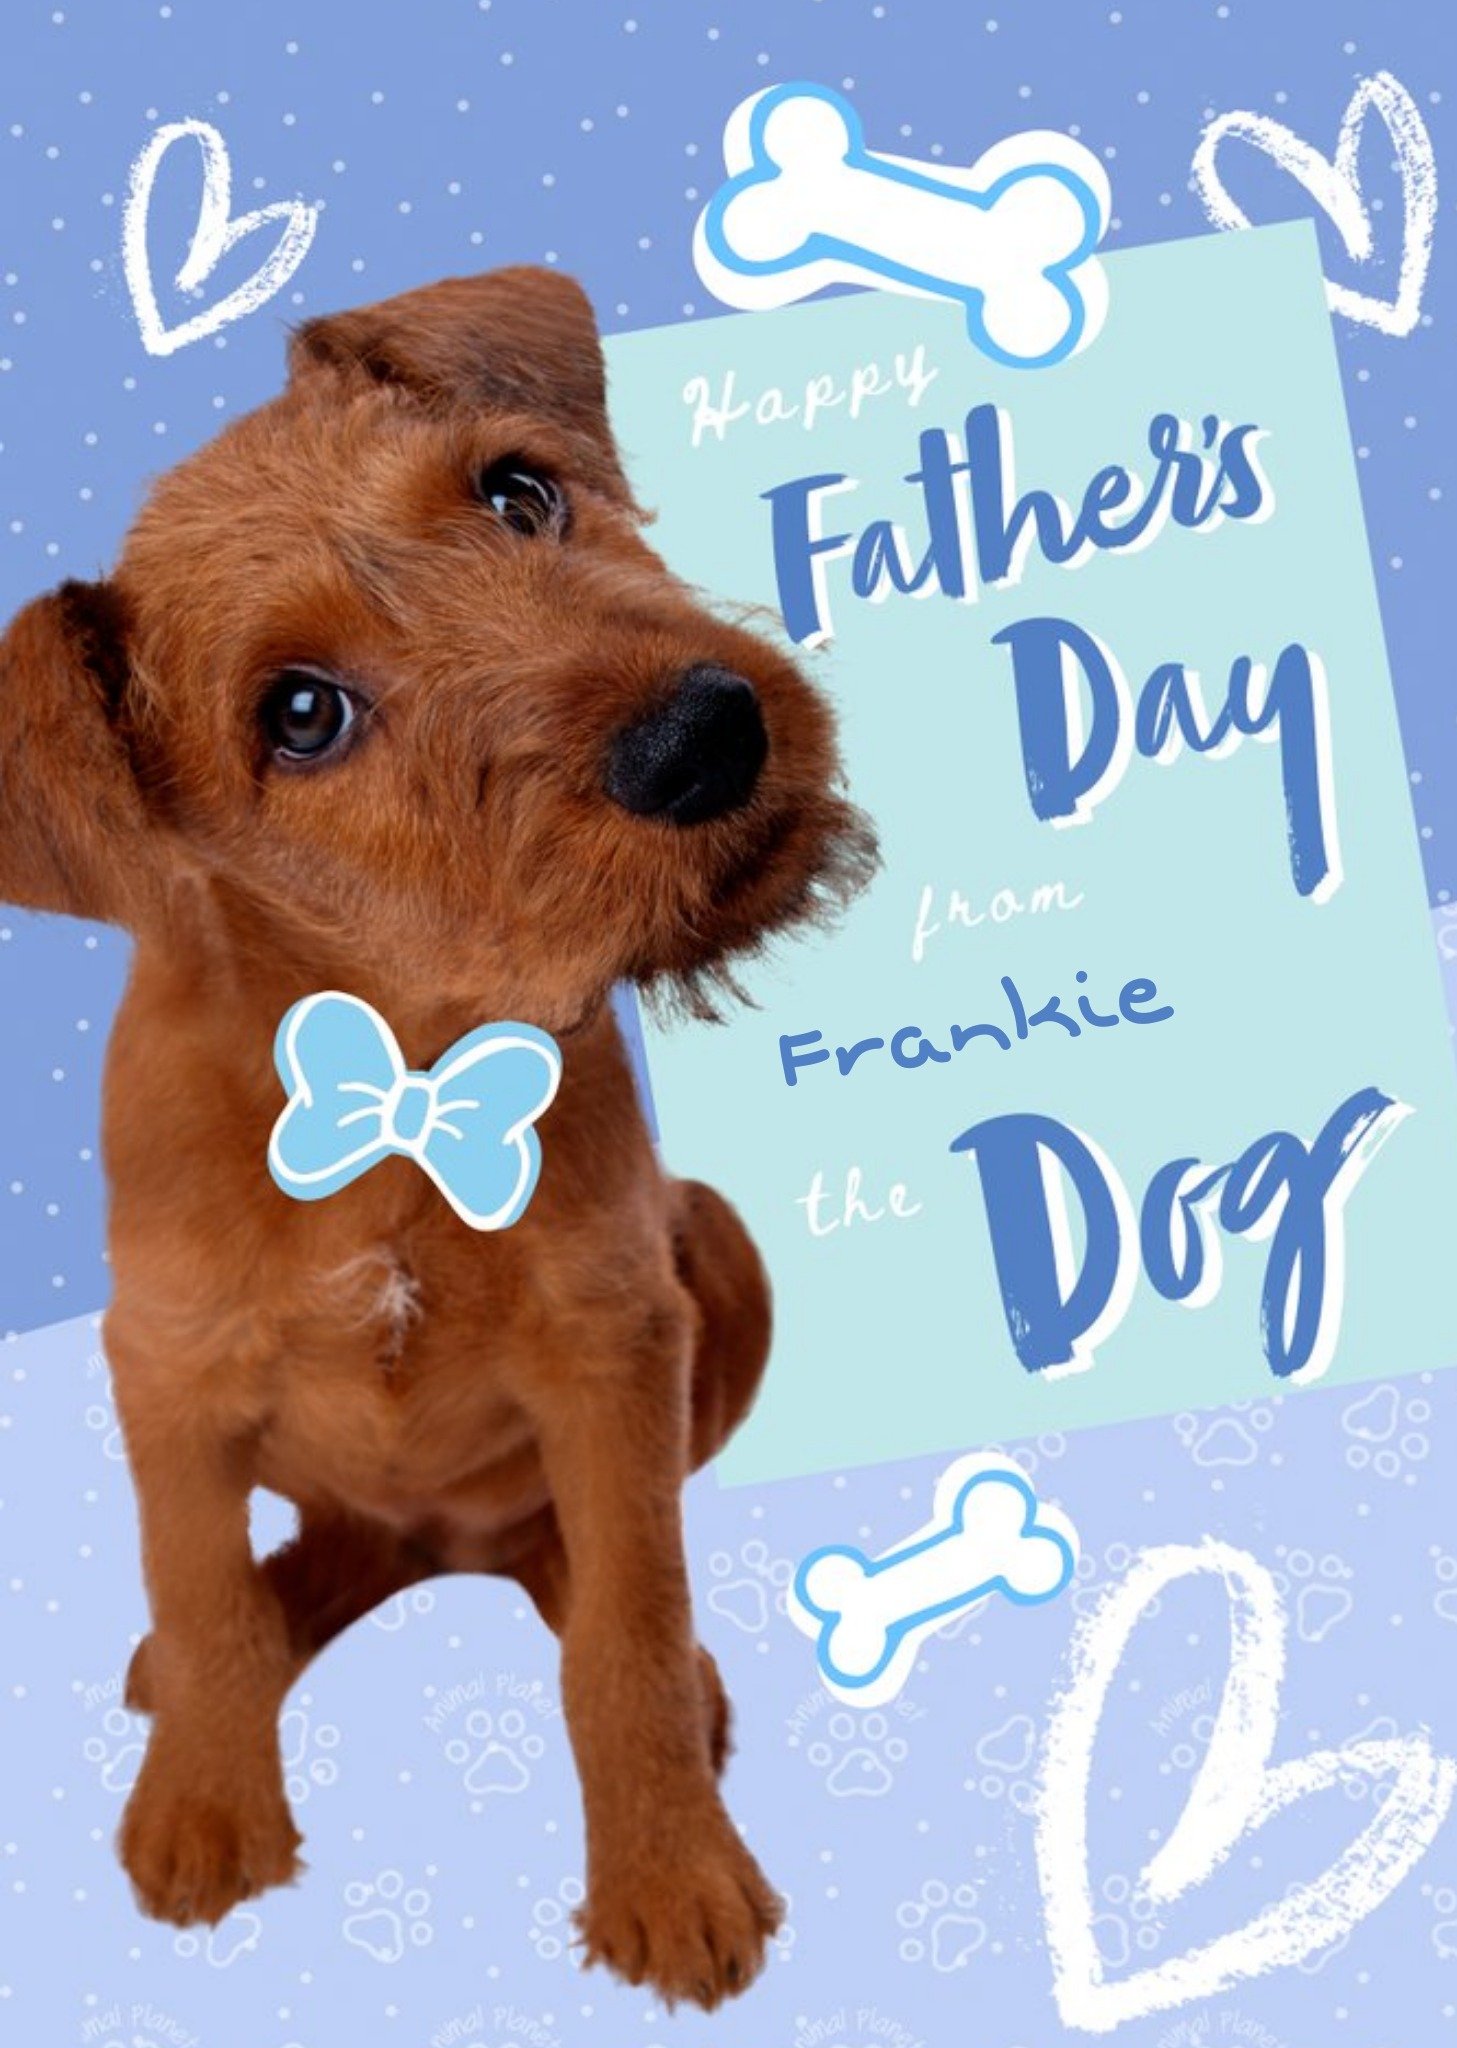 Moonpig Animal Planet Cute From The Dog Father's Day Card, Large